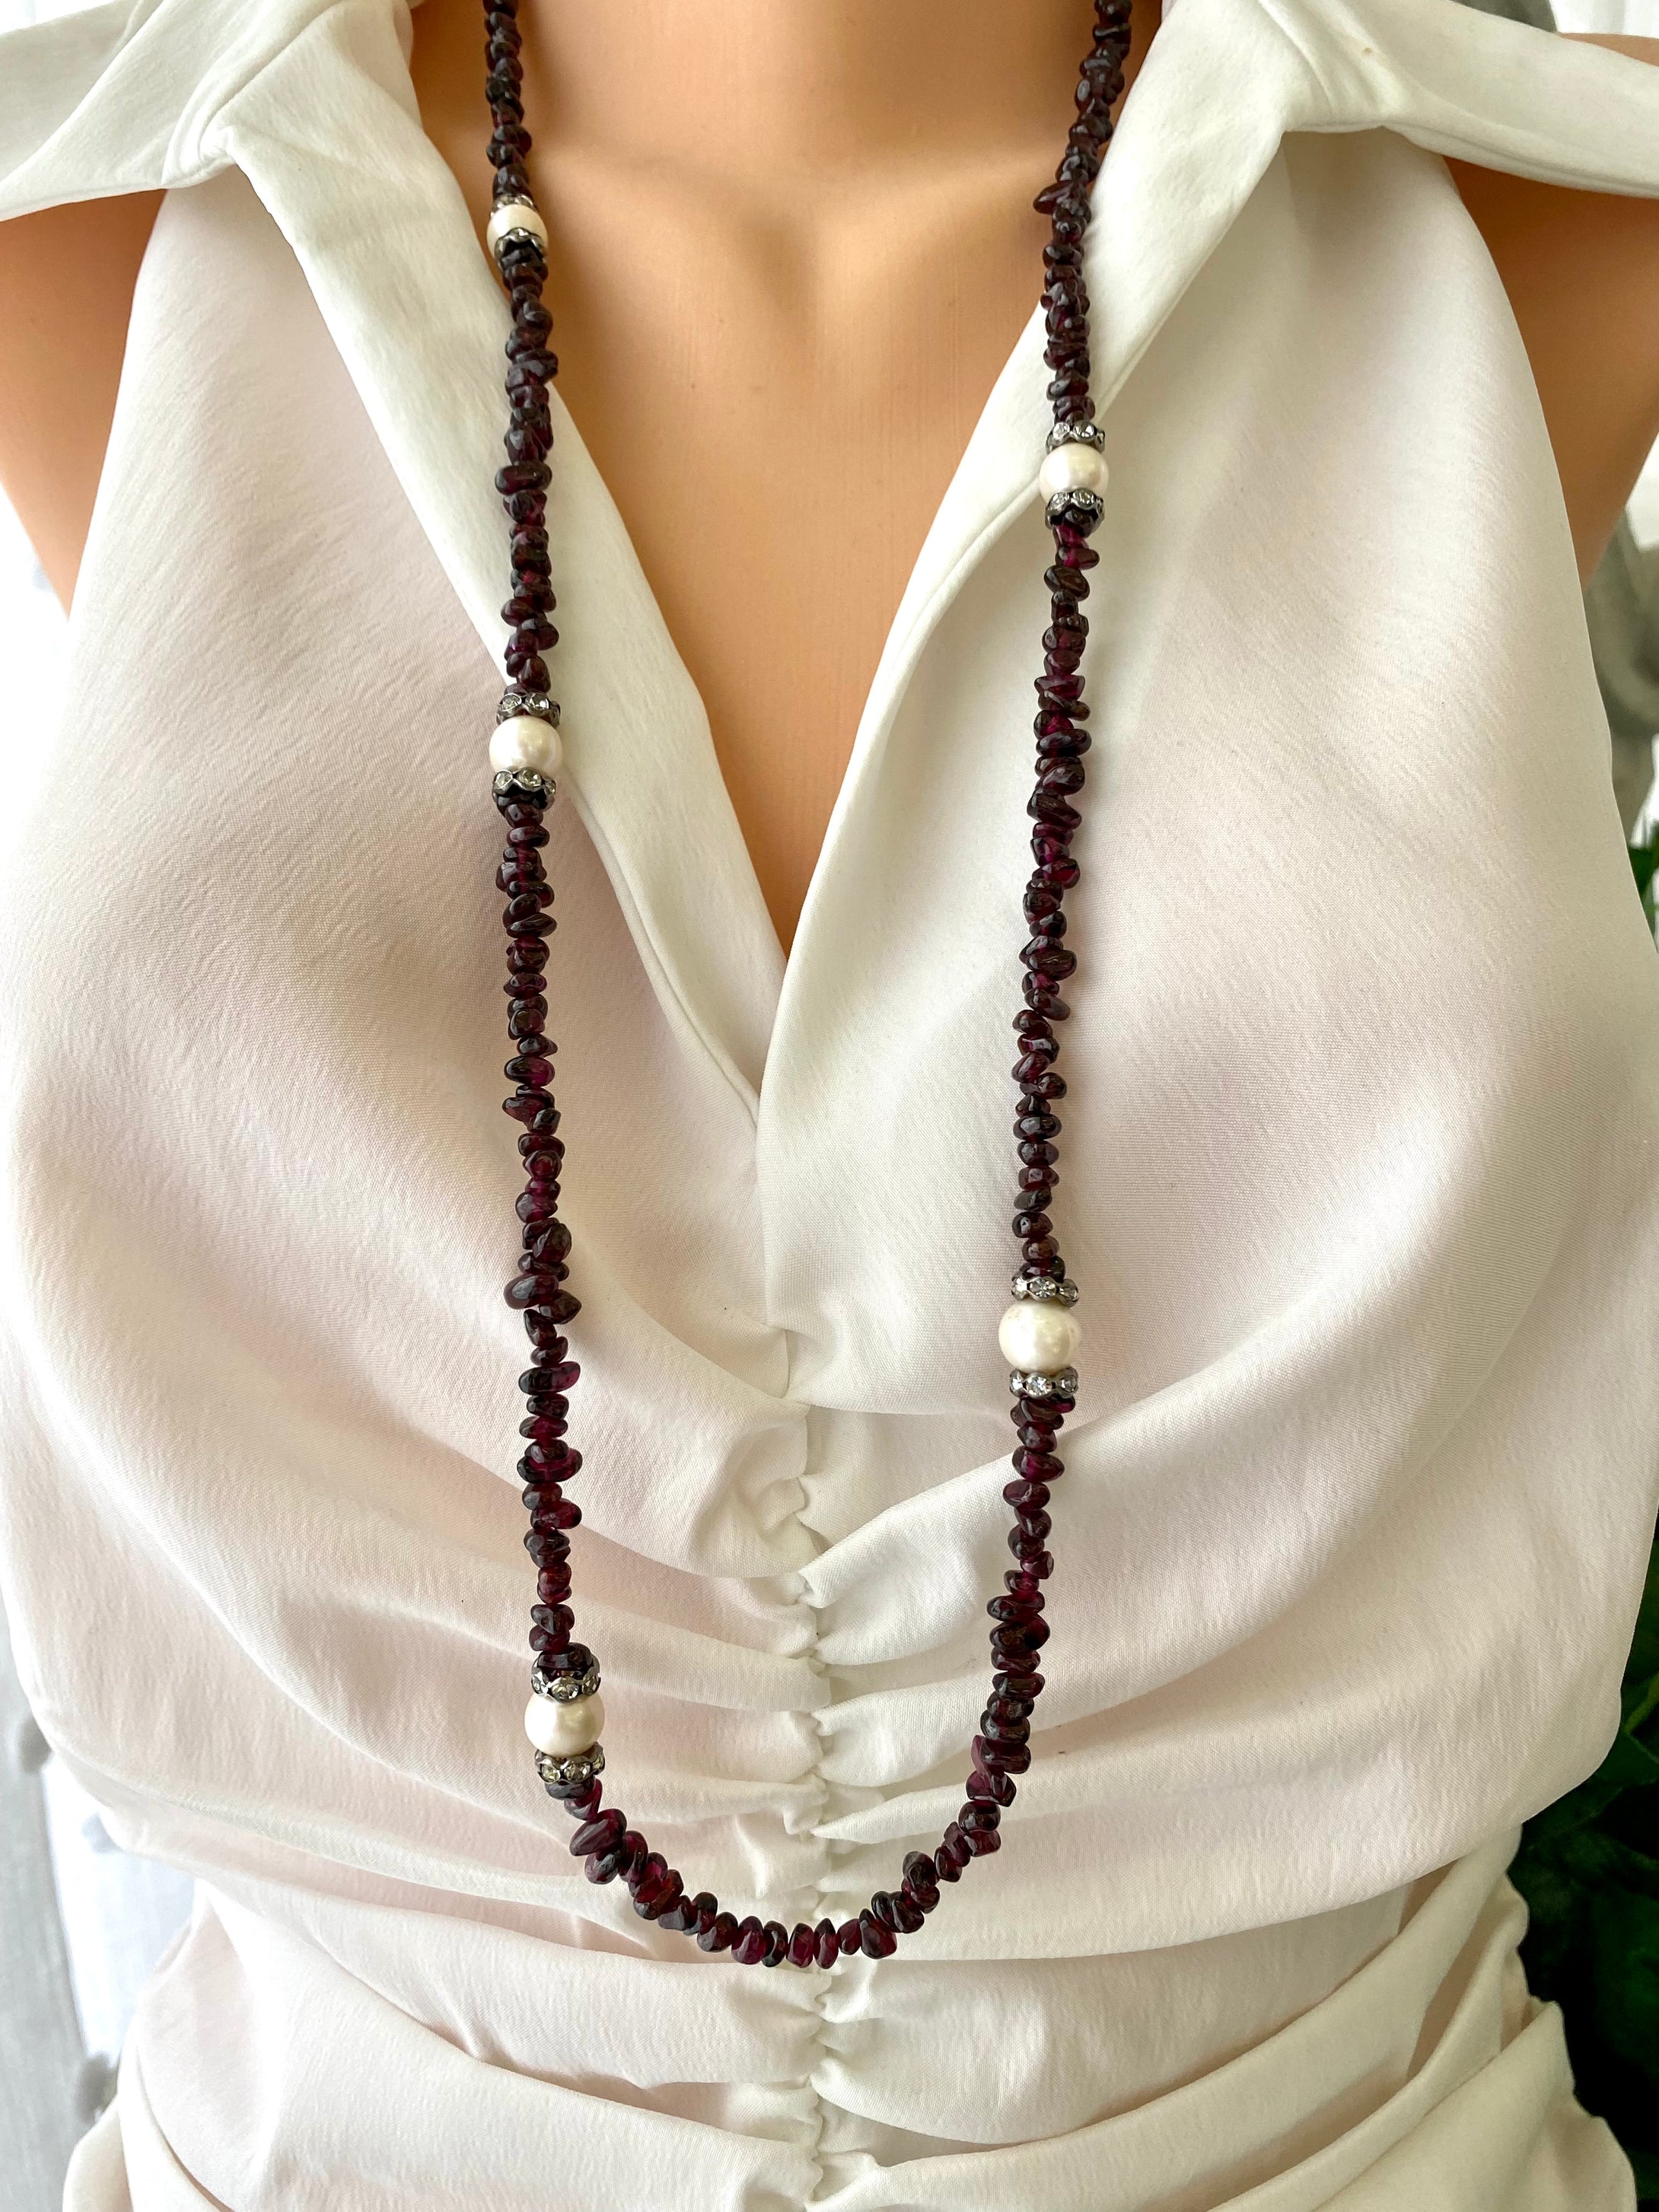 Long Garnet Necklace with Freshwater Pearls, January Birthstone Necklace, 35.5